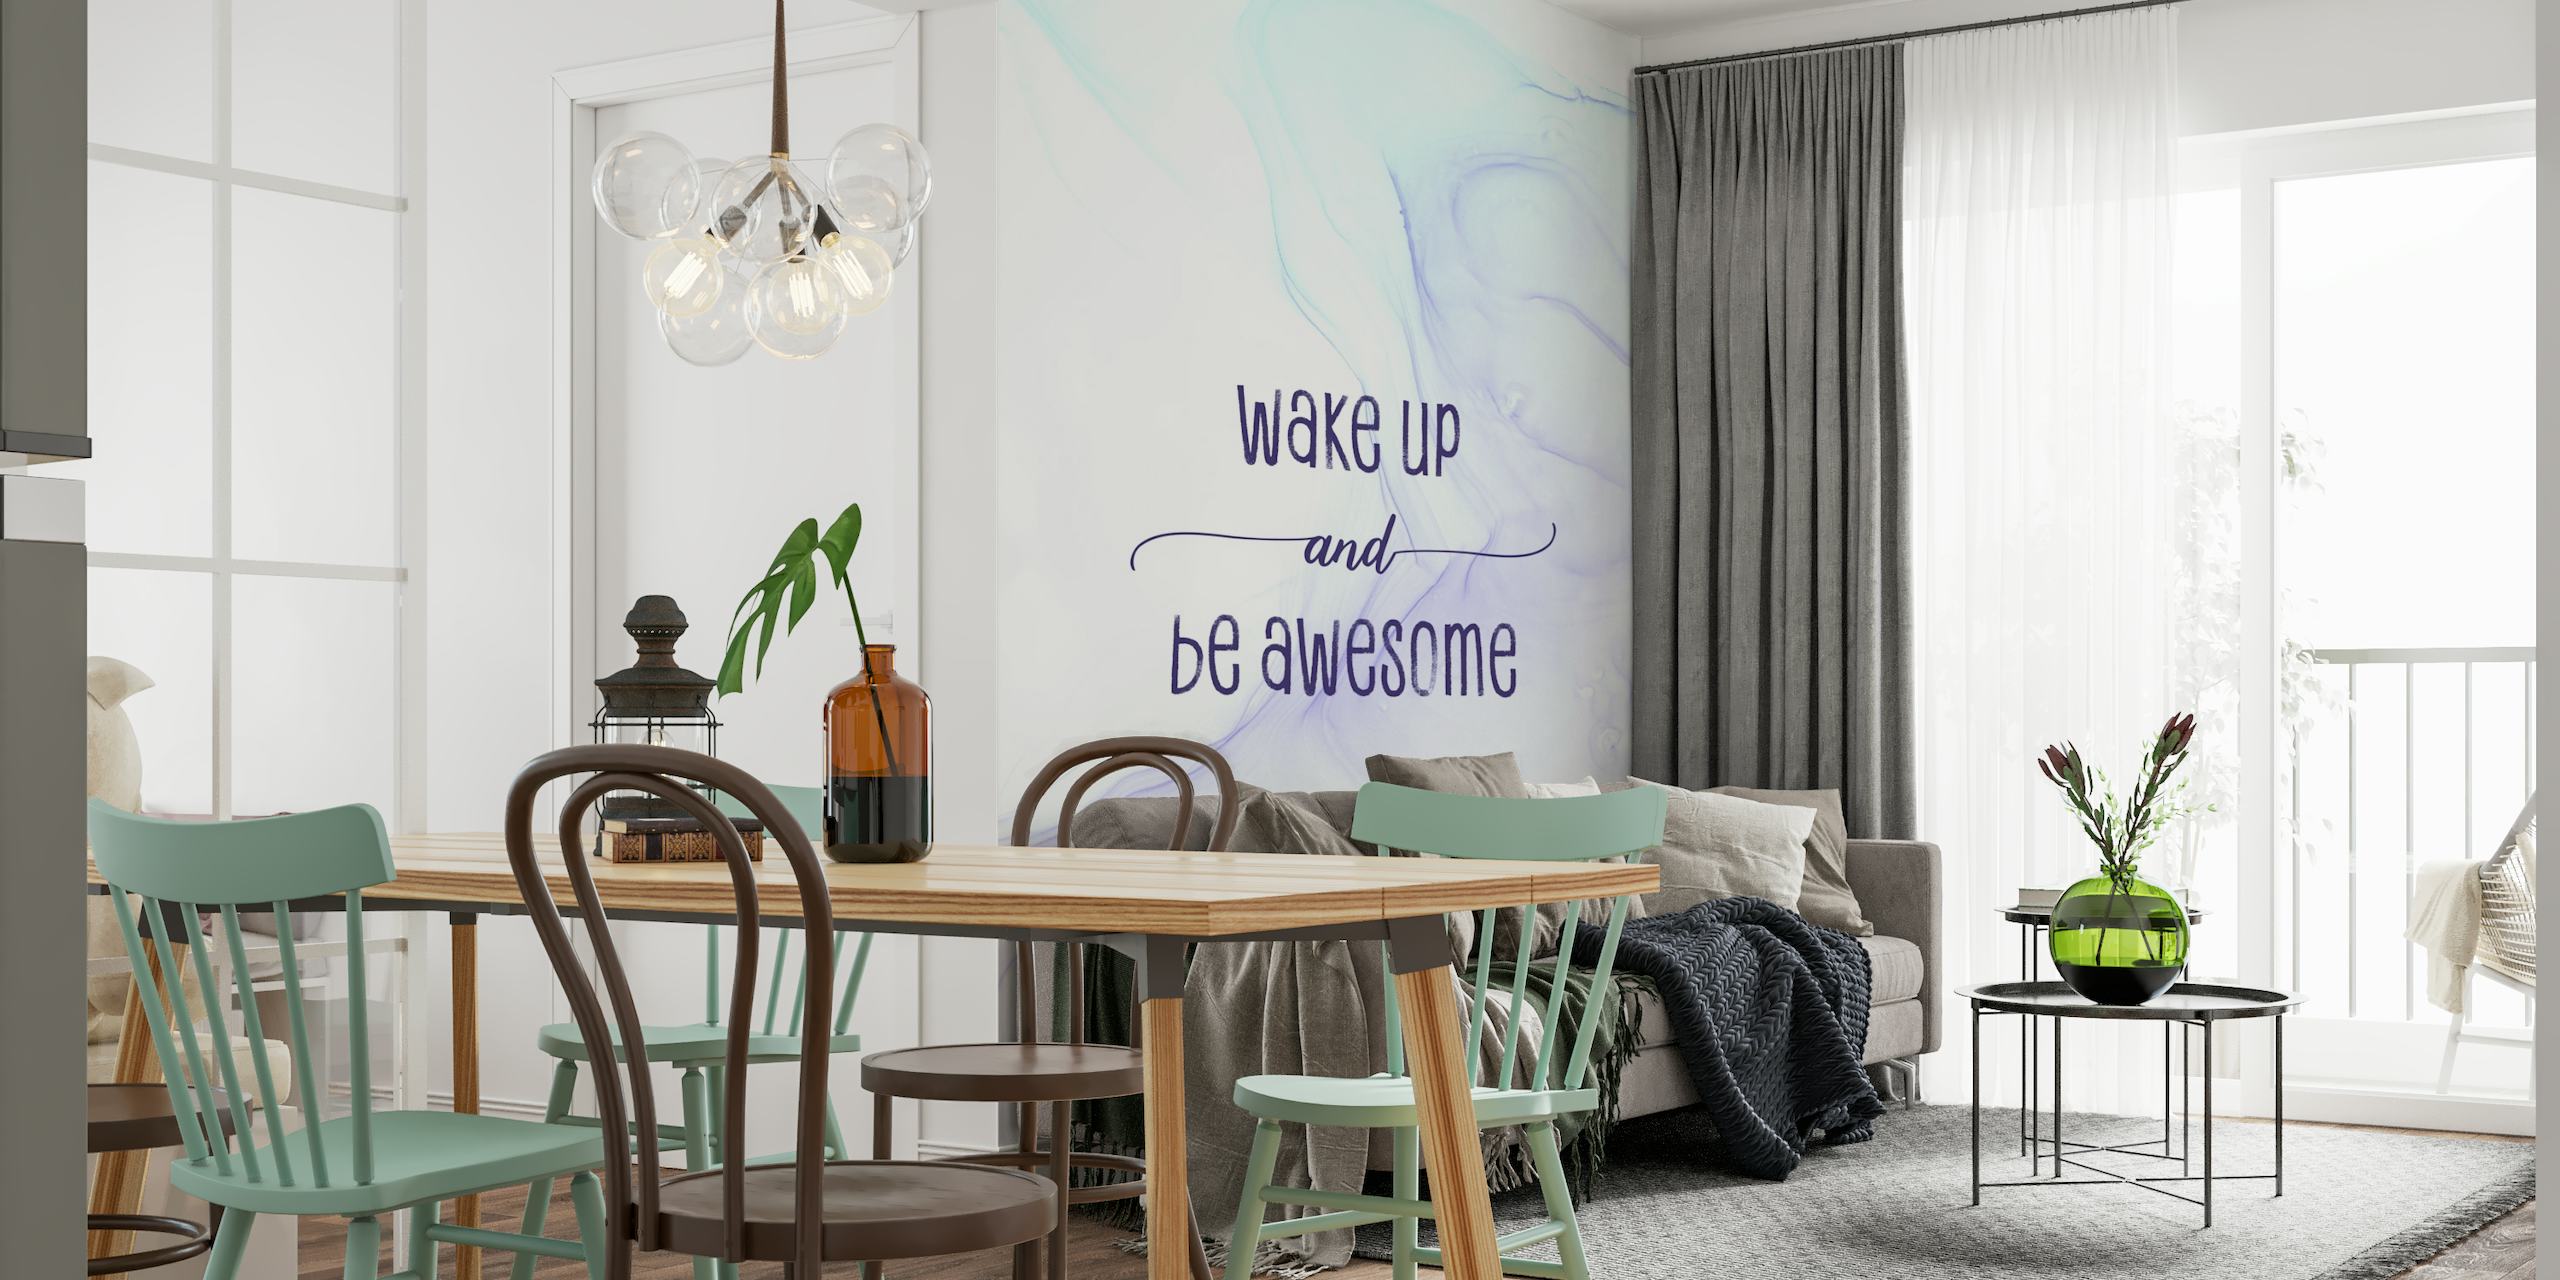 Wake up and be awesome behang